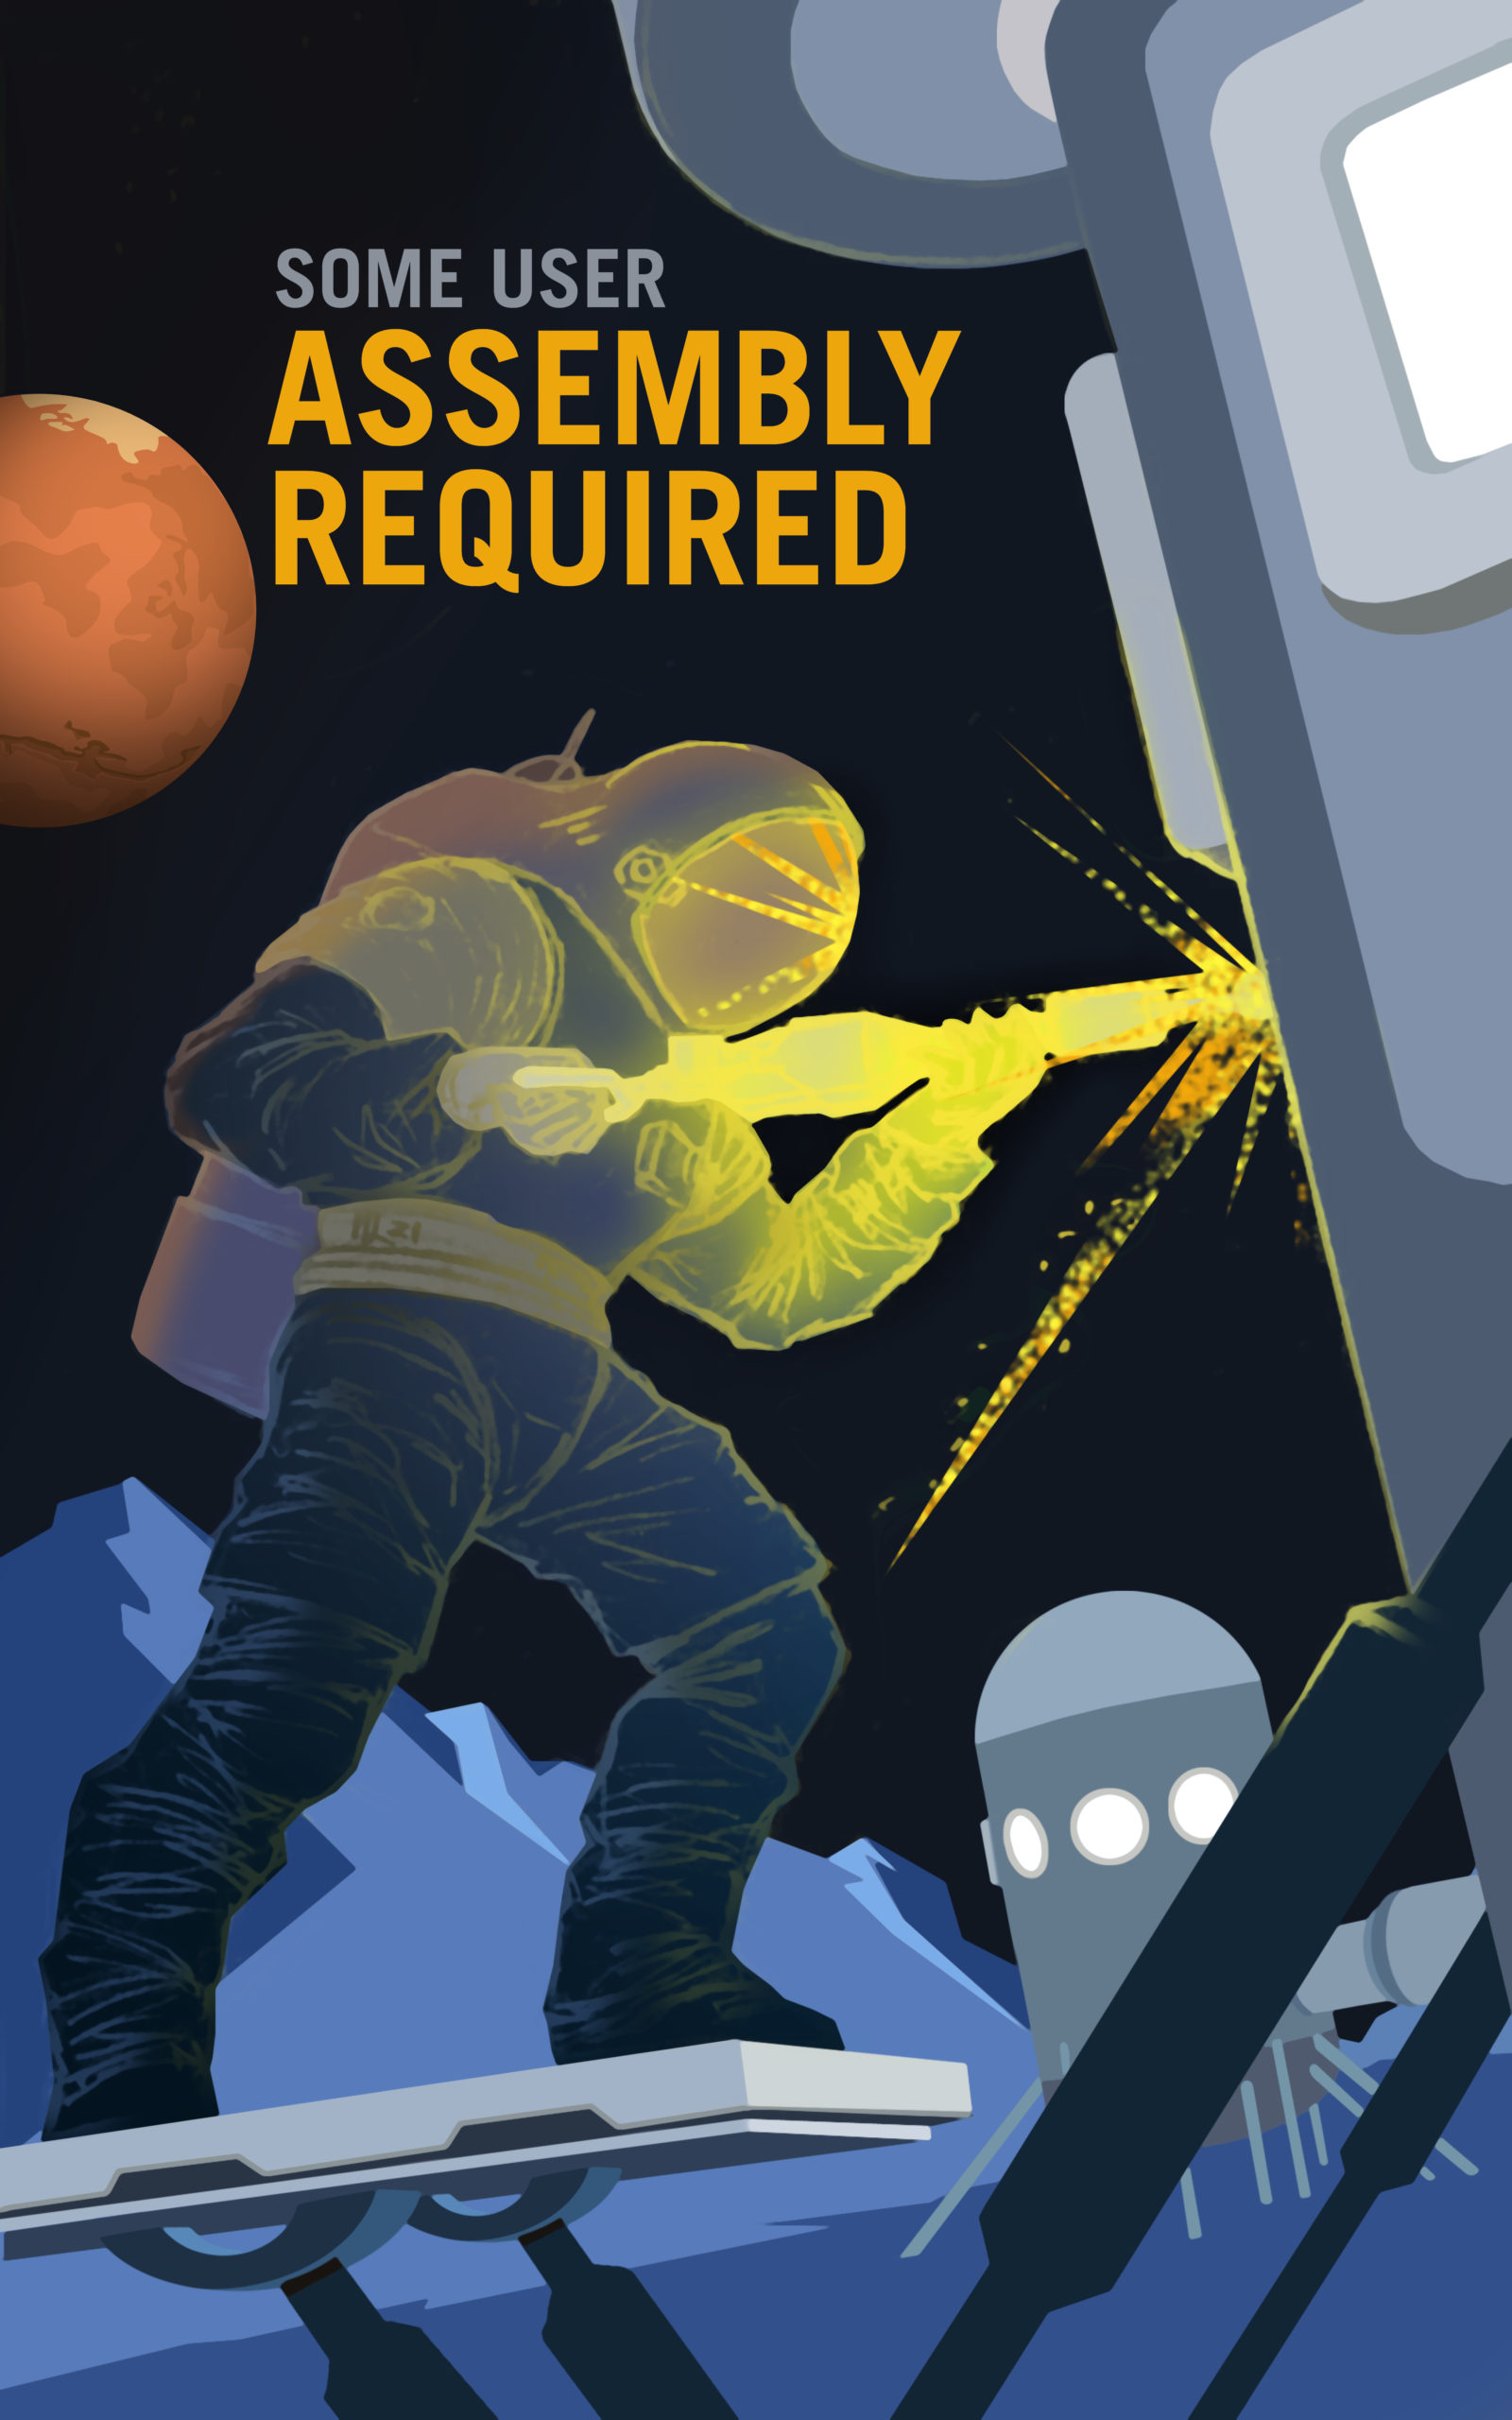 NASA’s Mars Recruitment Posters Will Convince You To Go And Die In Space